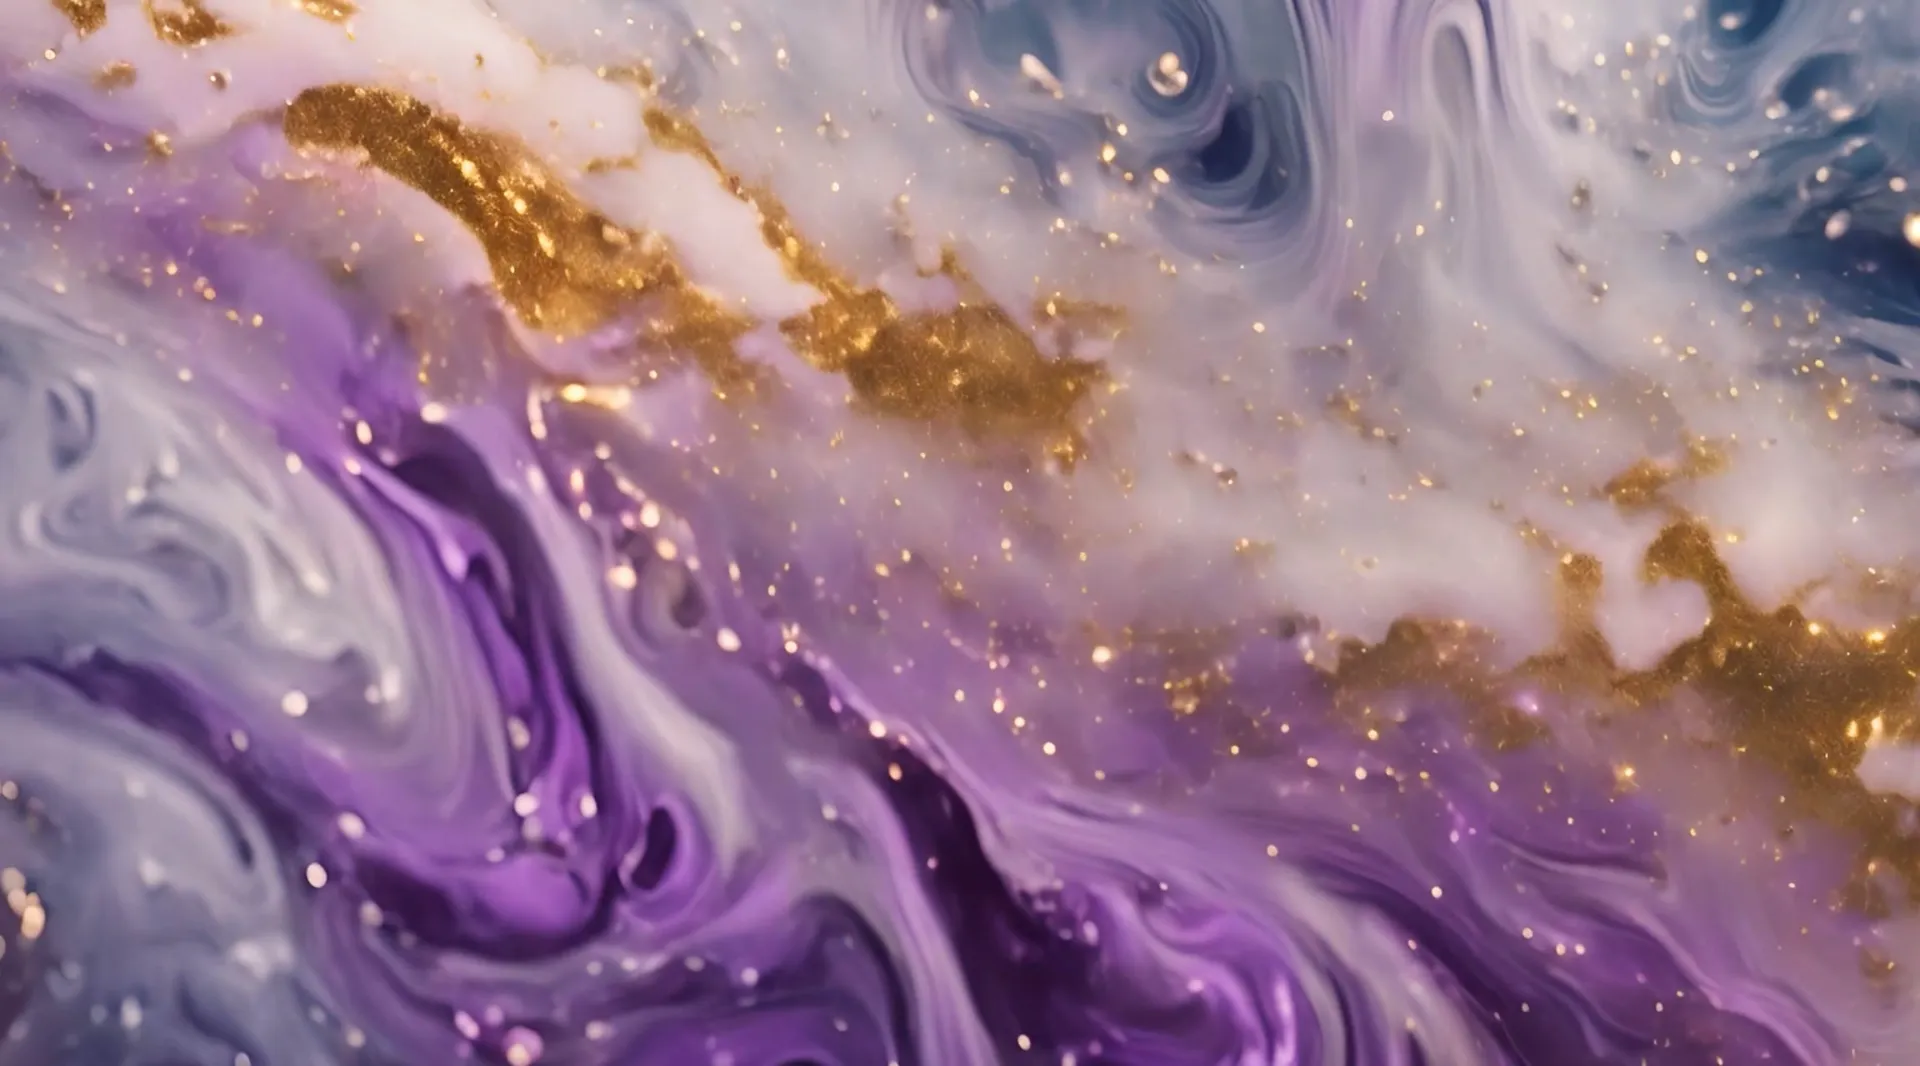 Abstract Liquid Gold And Amethyst Art Loopable Video